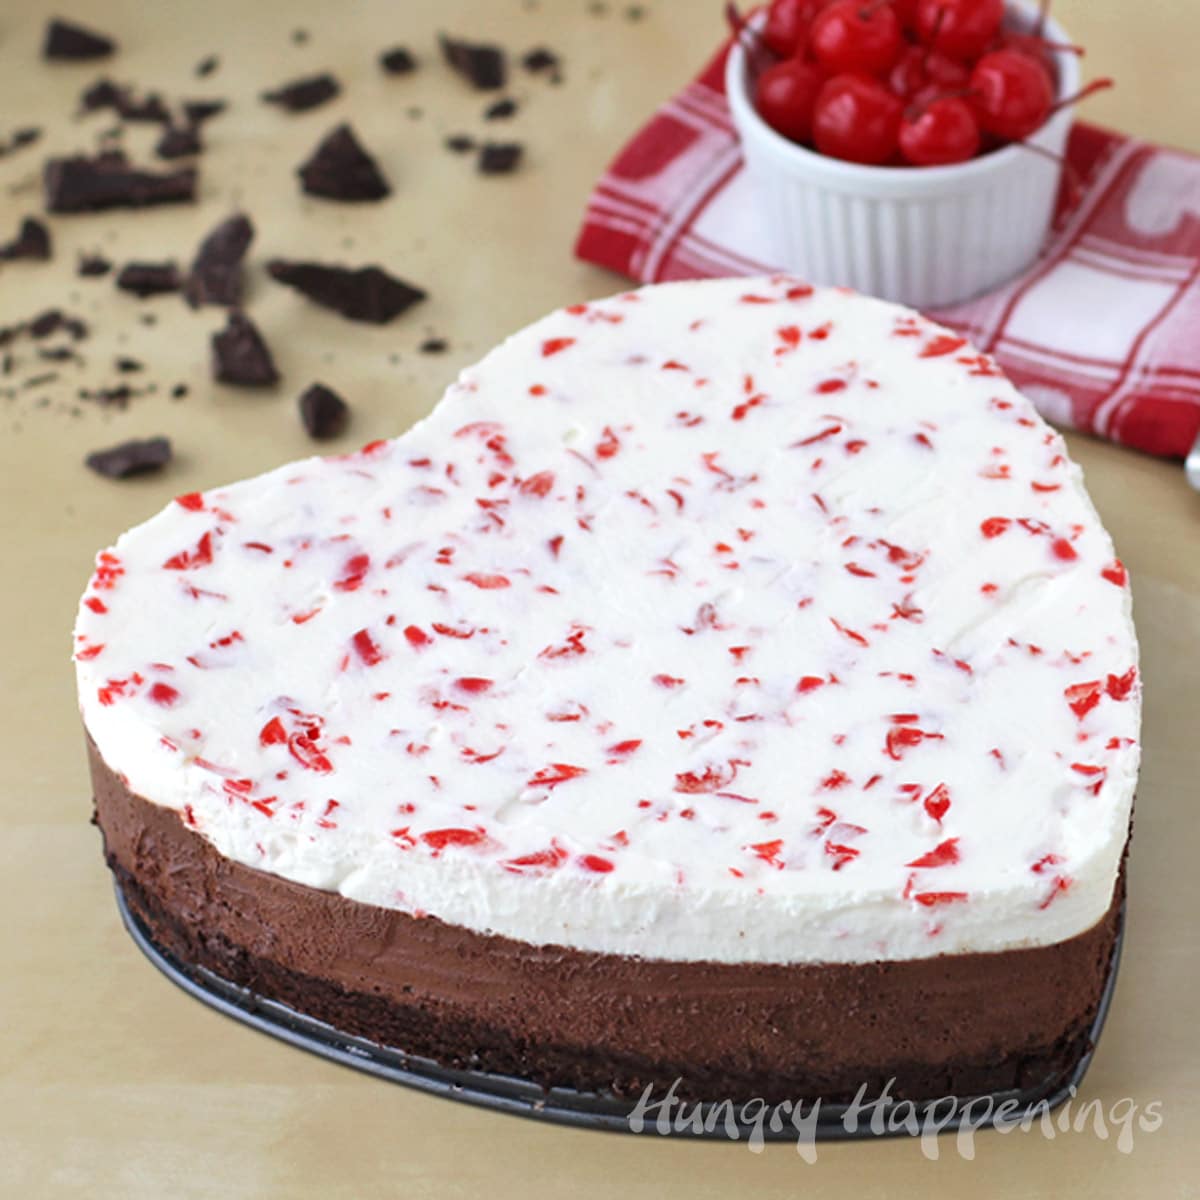 Valentine's Day triple chocolate cherry mousse cake with a flourless chocolate cake crust, chocolate mousse layer, and a white chocolate cherry mousse layer.